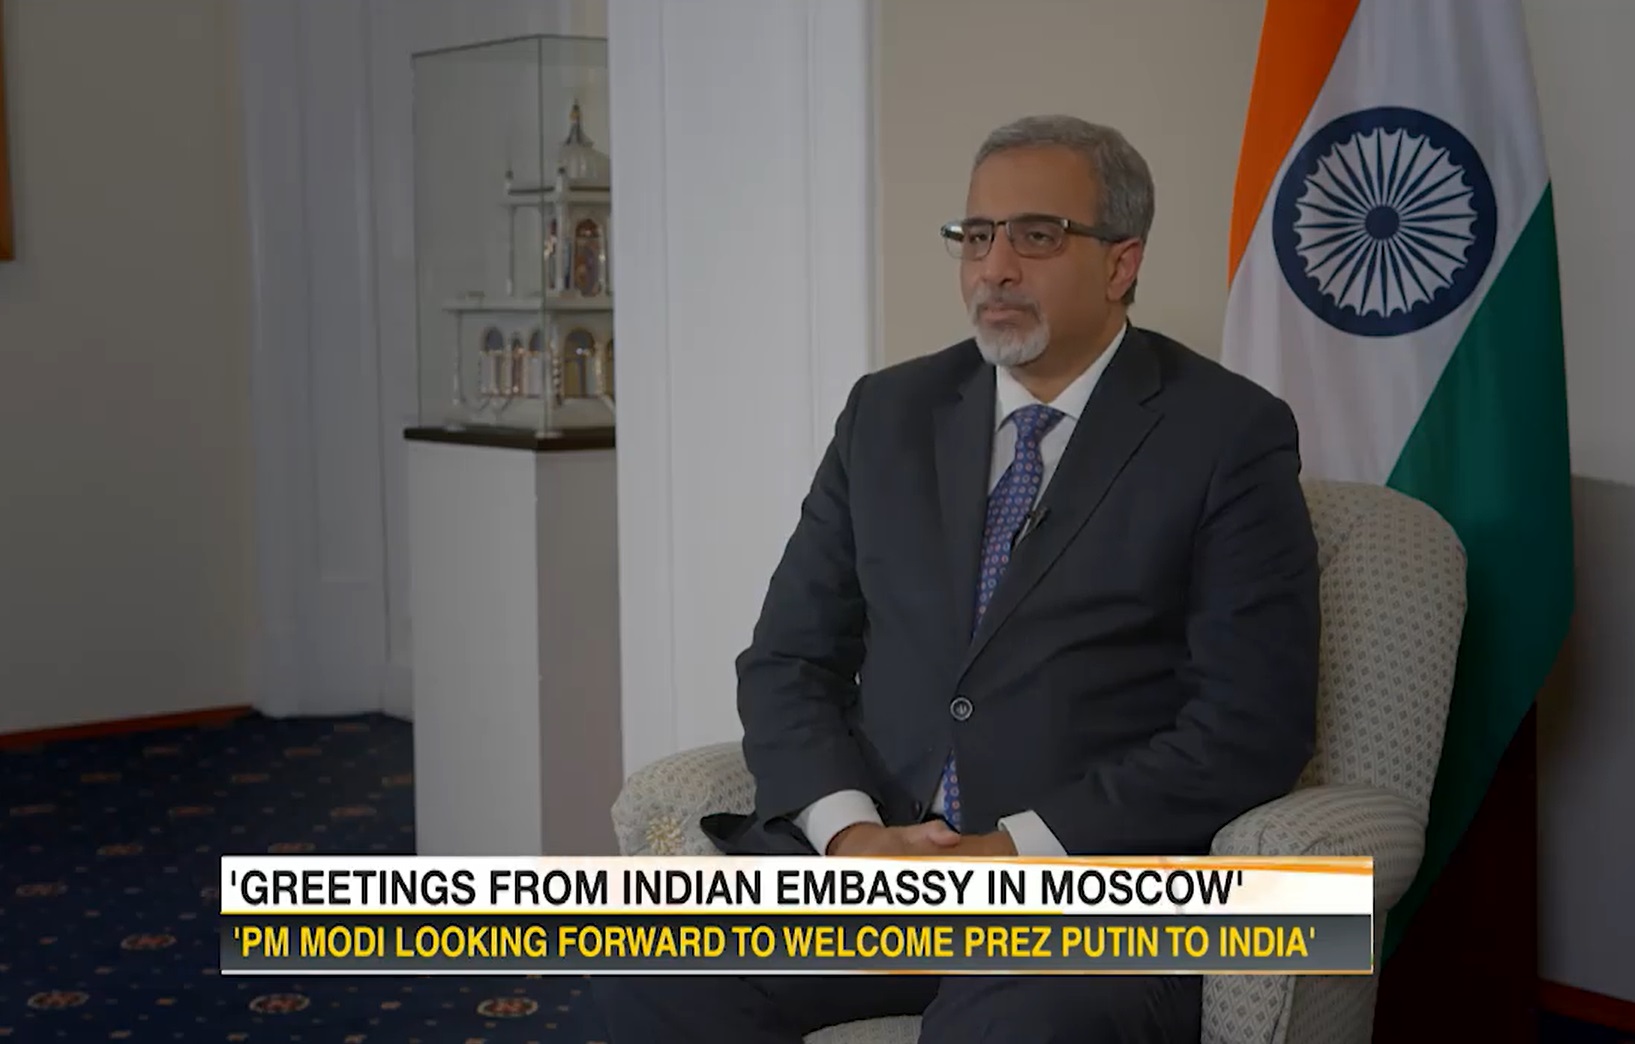 Exclusive interview of the Ambassador of India to Russia D.B. Venkatesh Varma to RBC TV channel, 13 August 2020